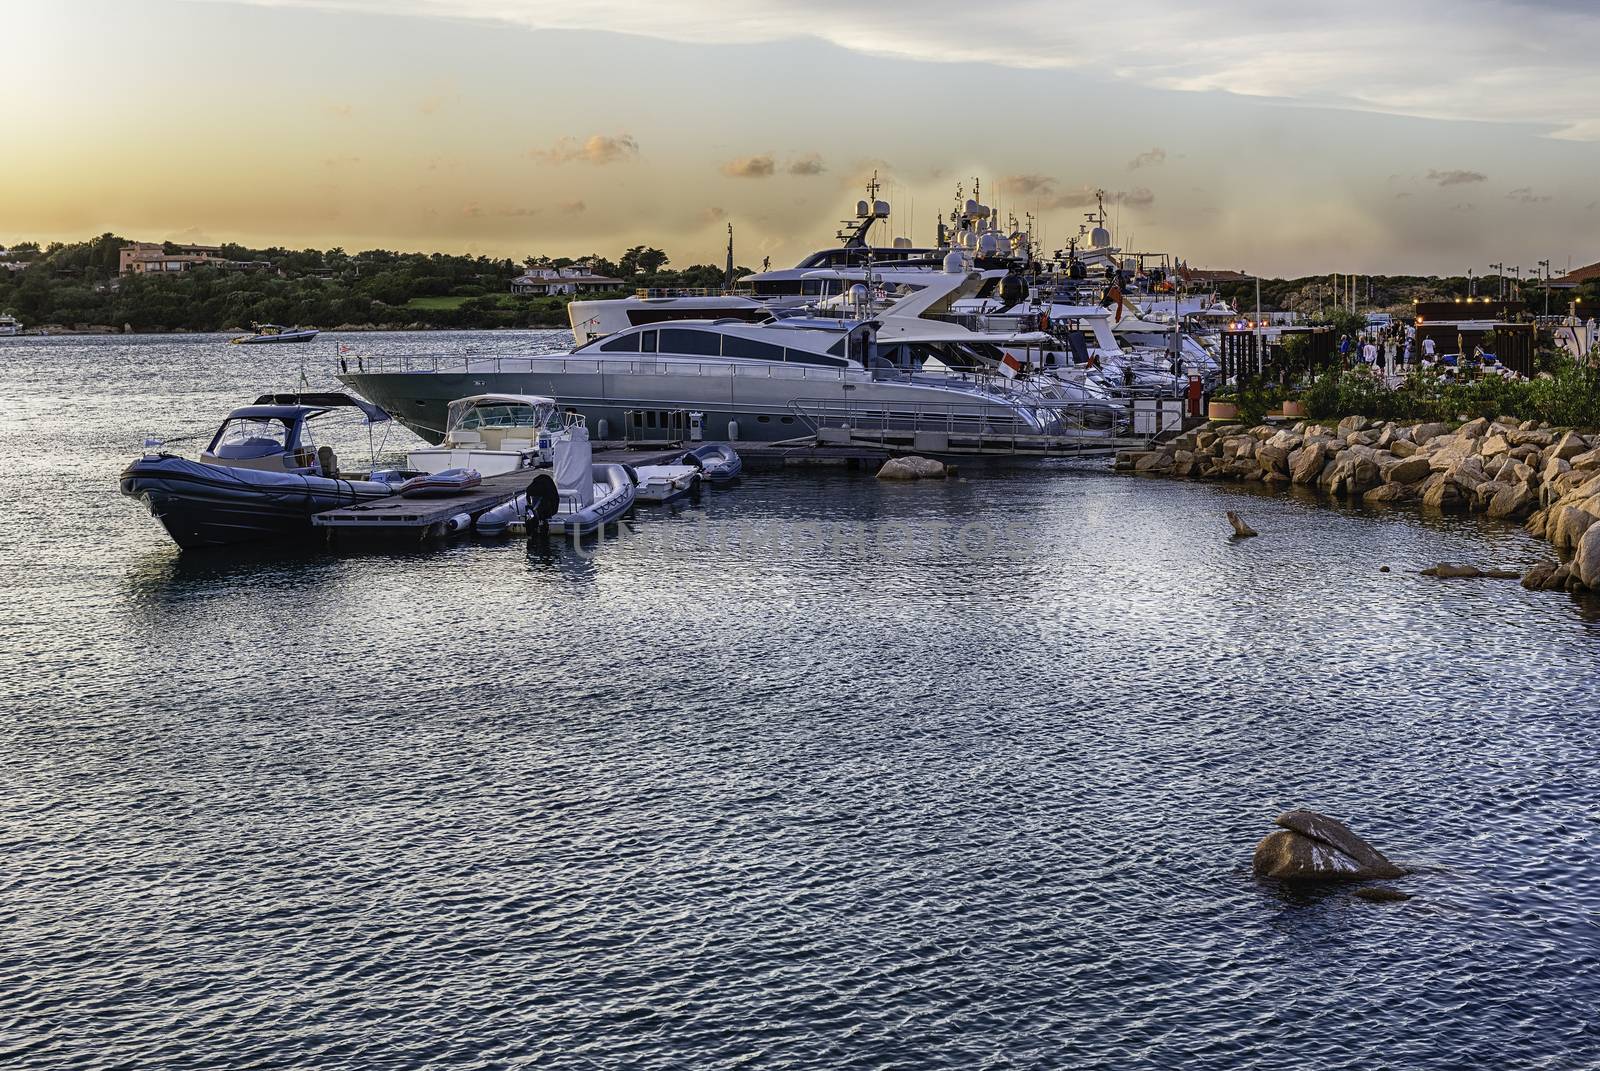 View of the harbor with luxury yachts of Porto Cervo, Sardinia, Italy. The town is a worldwide famous resort and a luxury yacht magnet and billionaires' playground